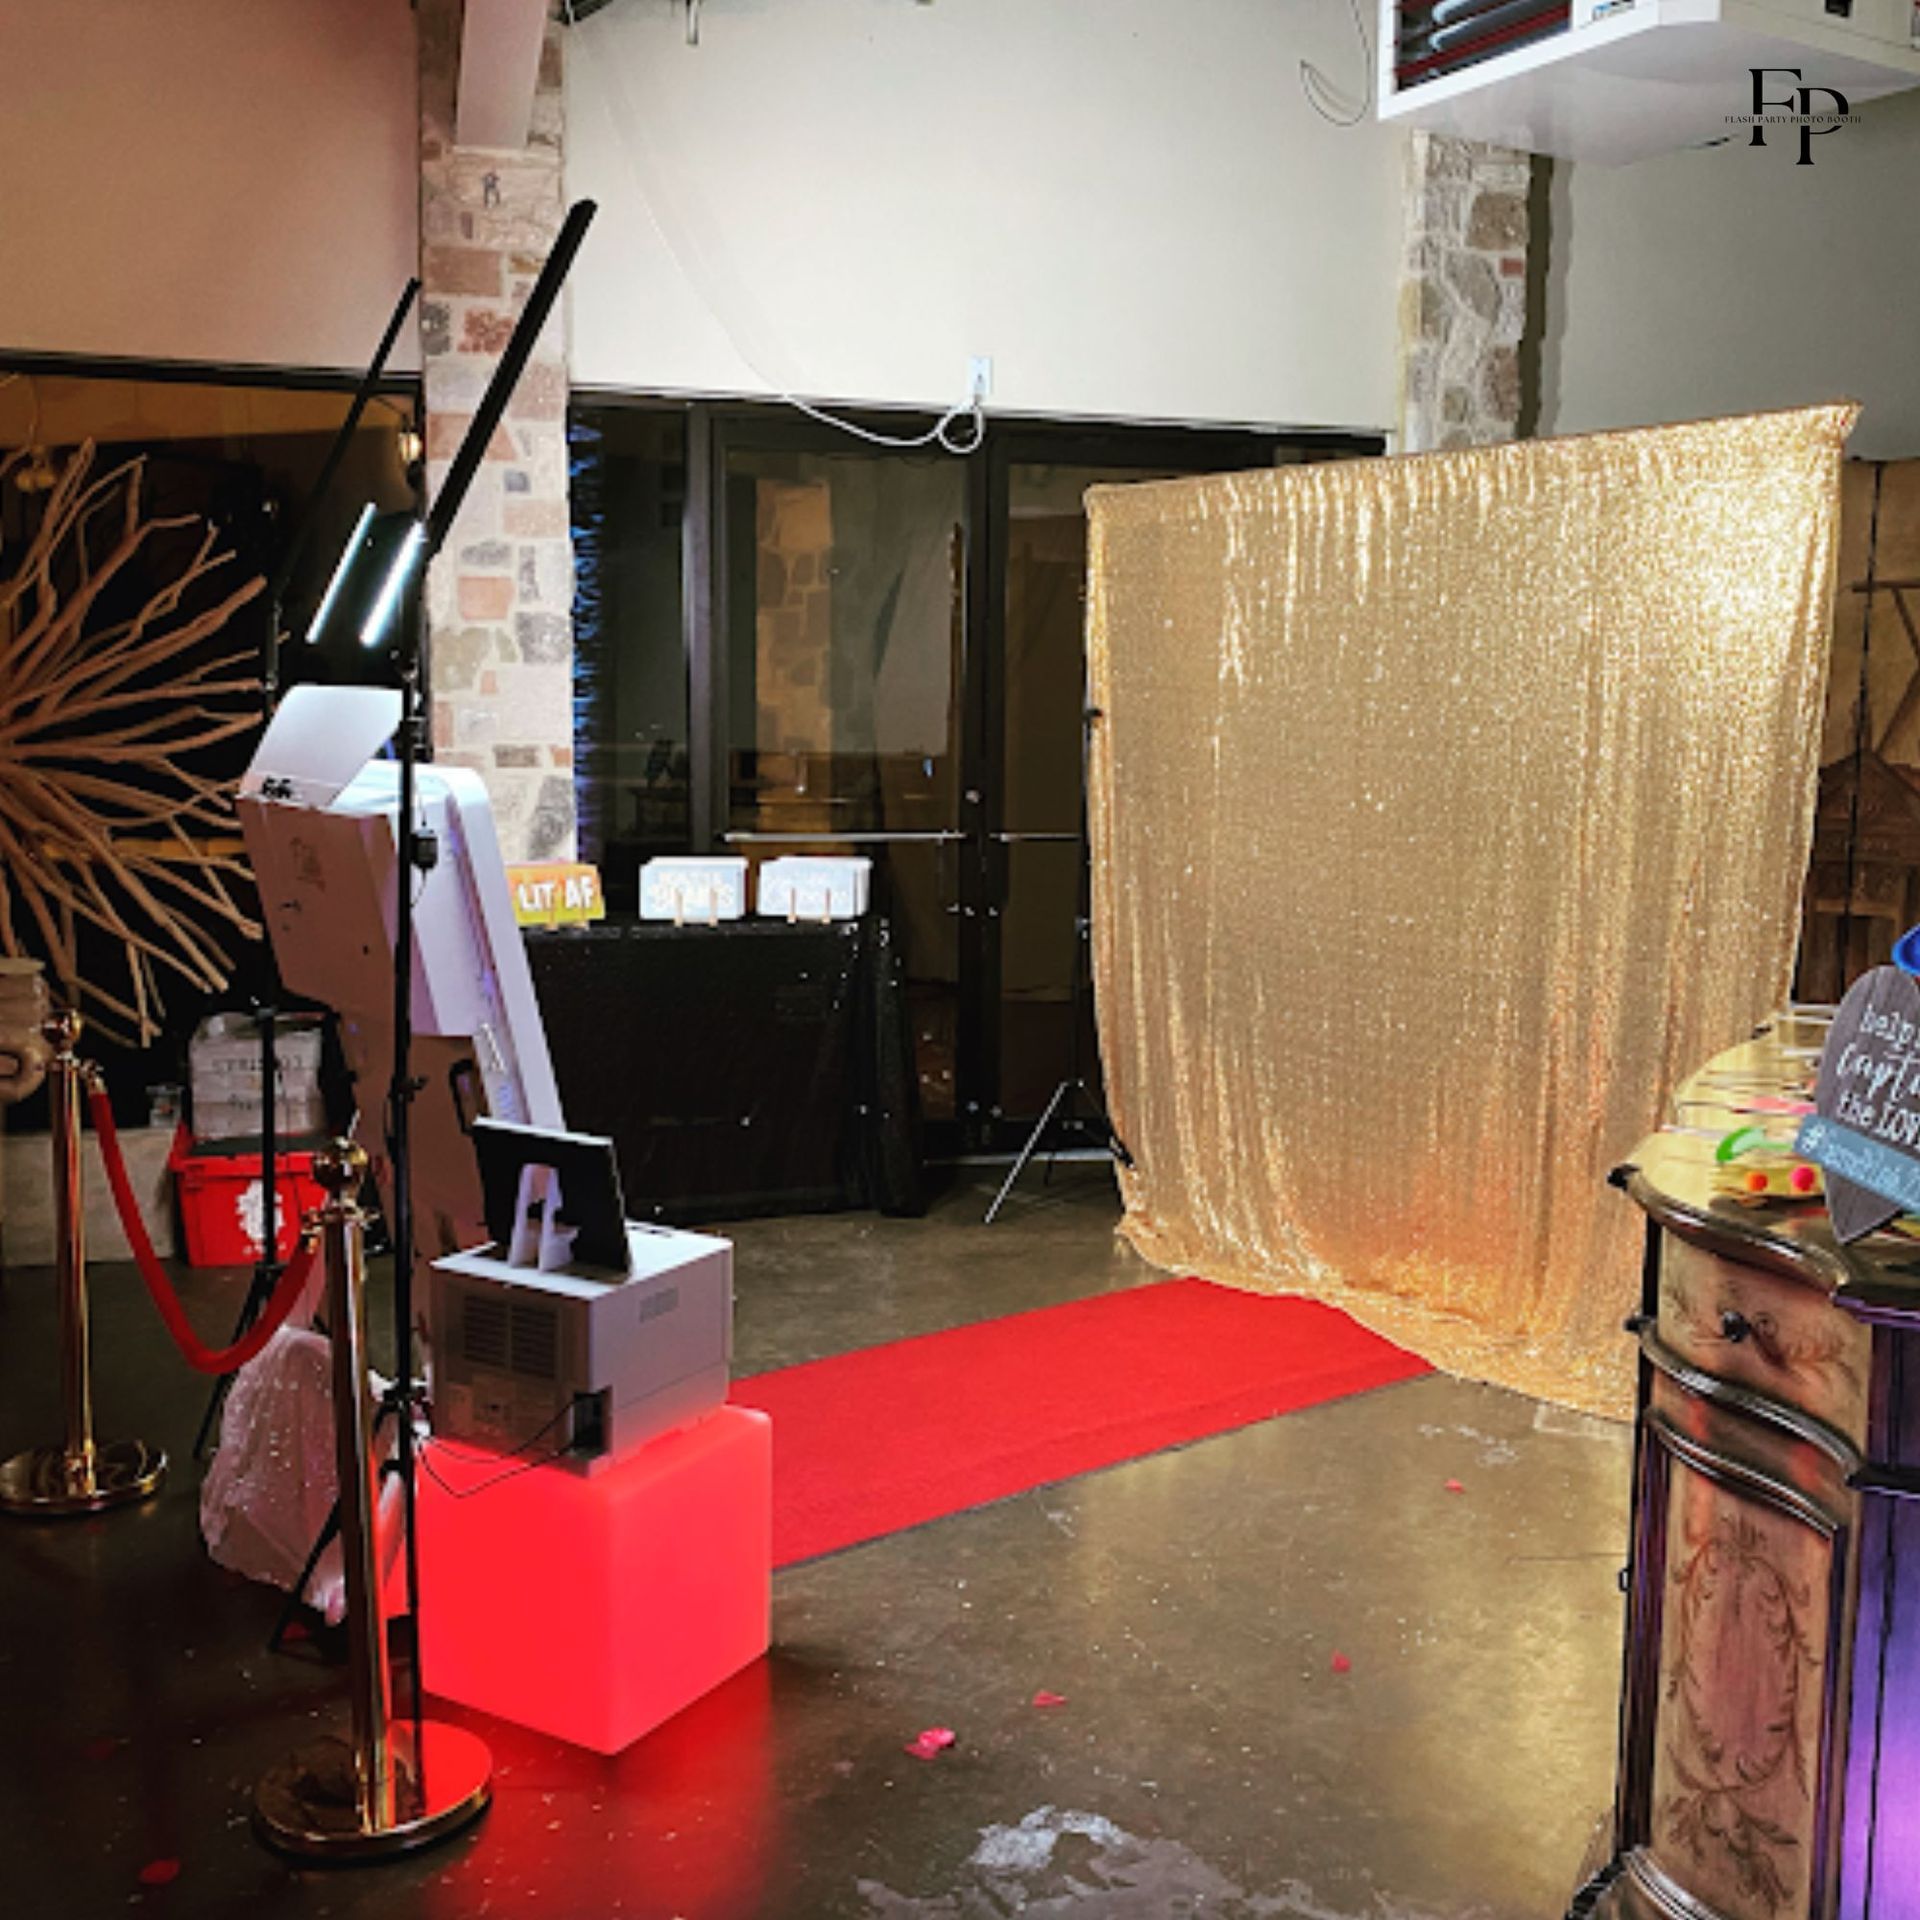 The Mirror Photo Booth set up in a room with a red carpet and a gold curtain backdrop.